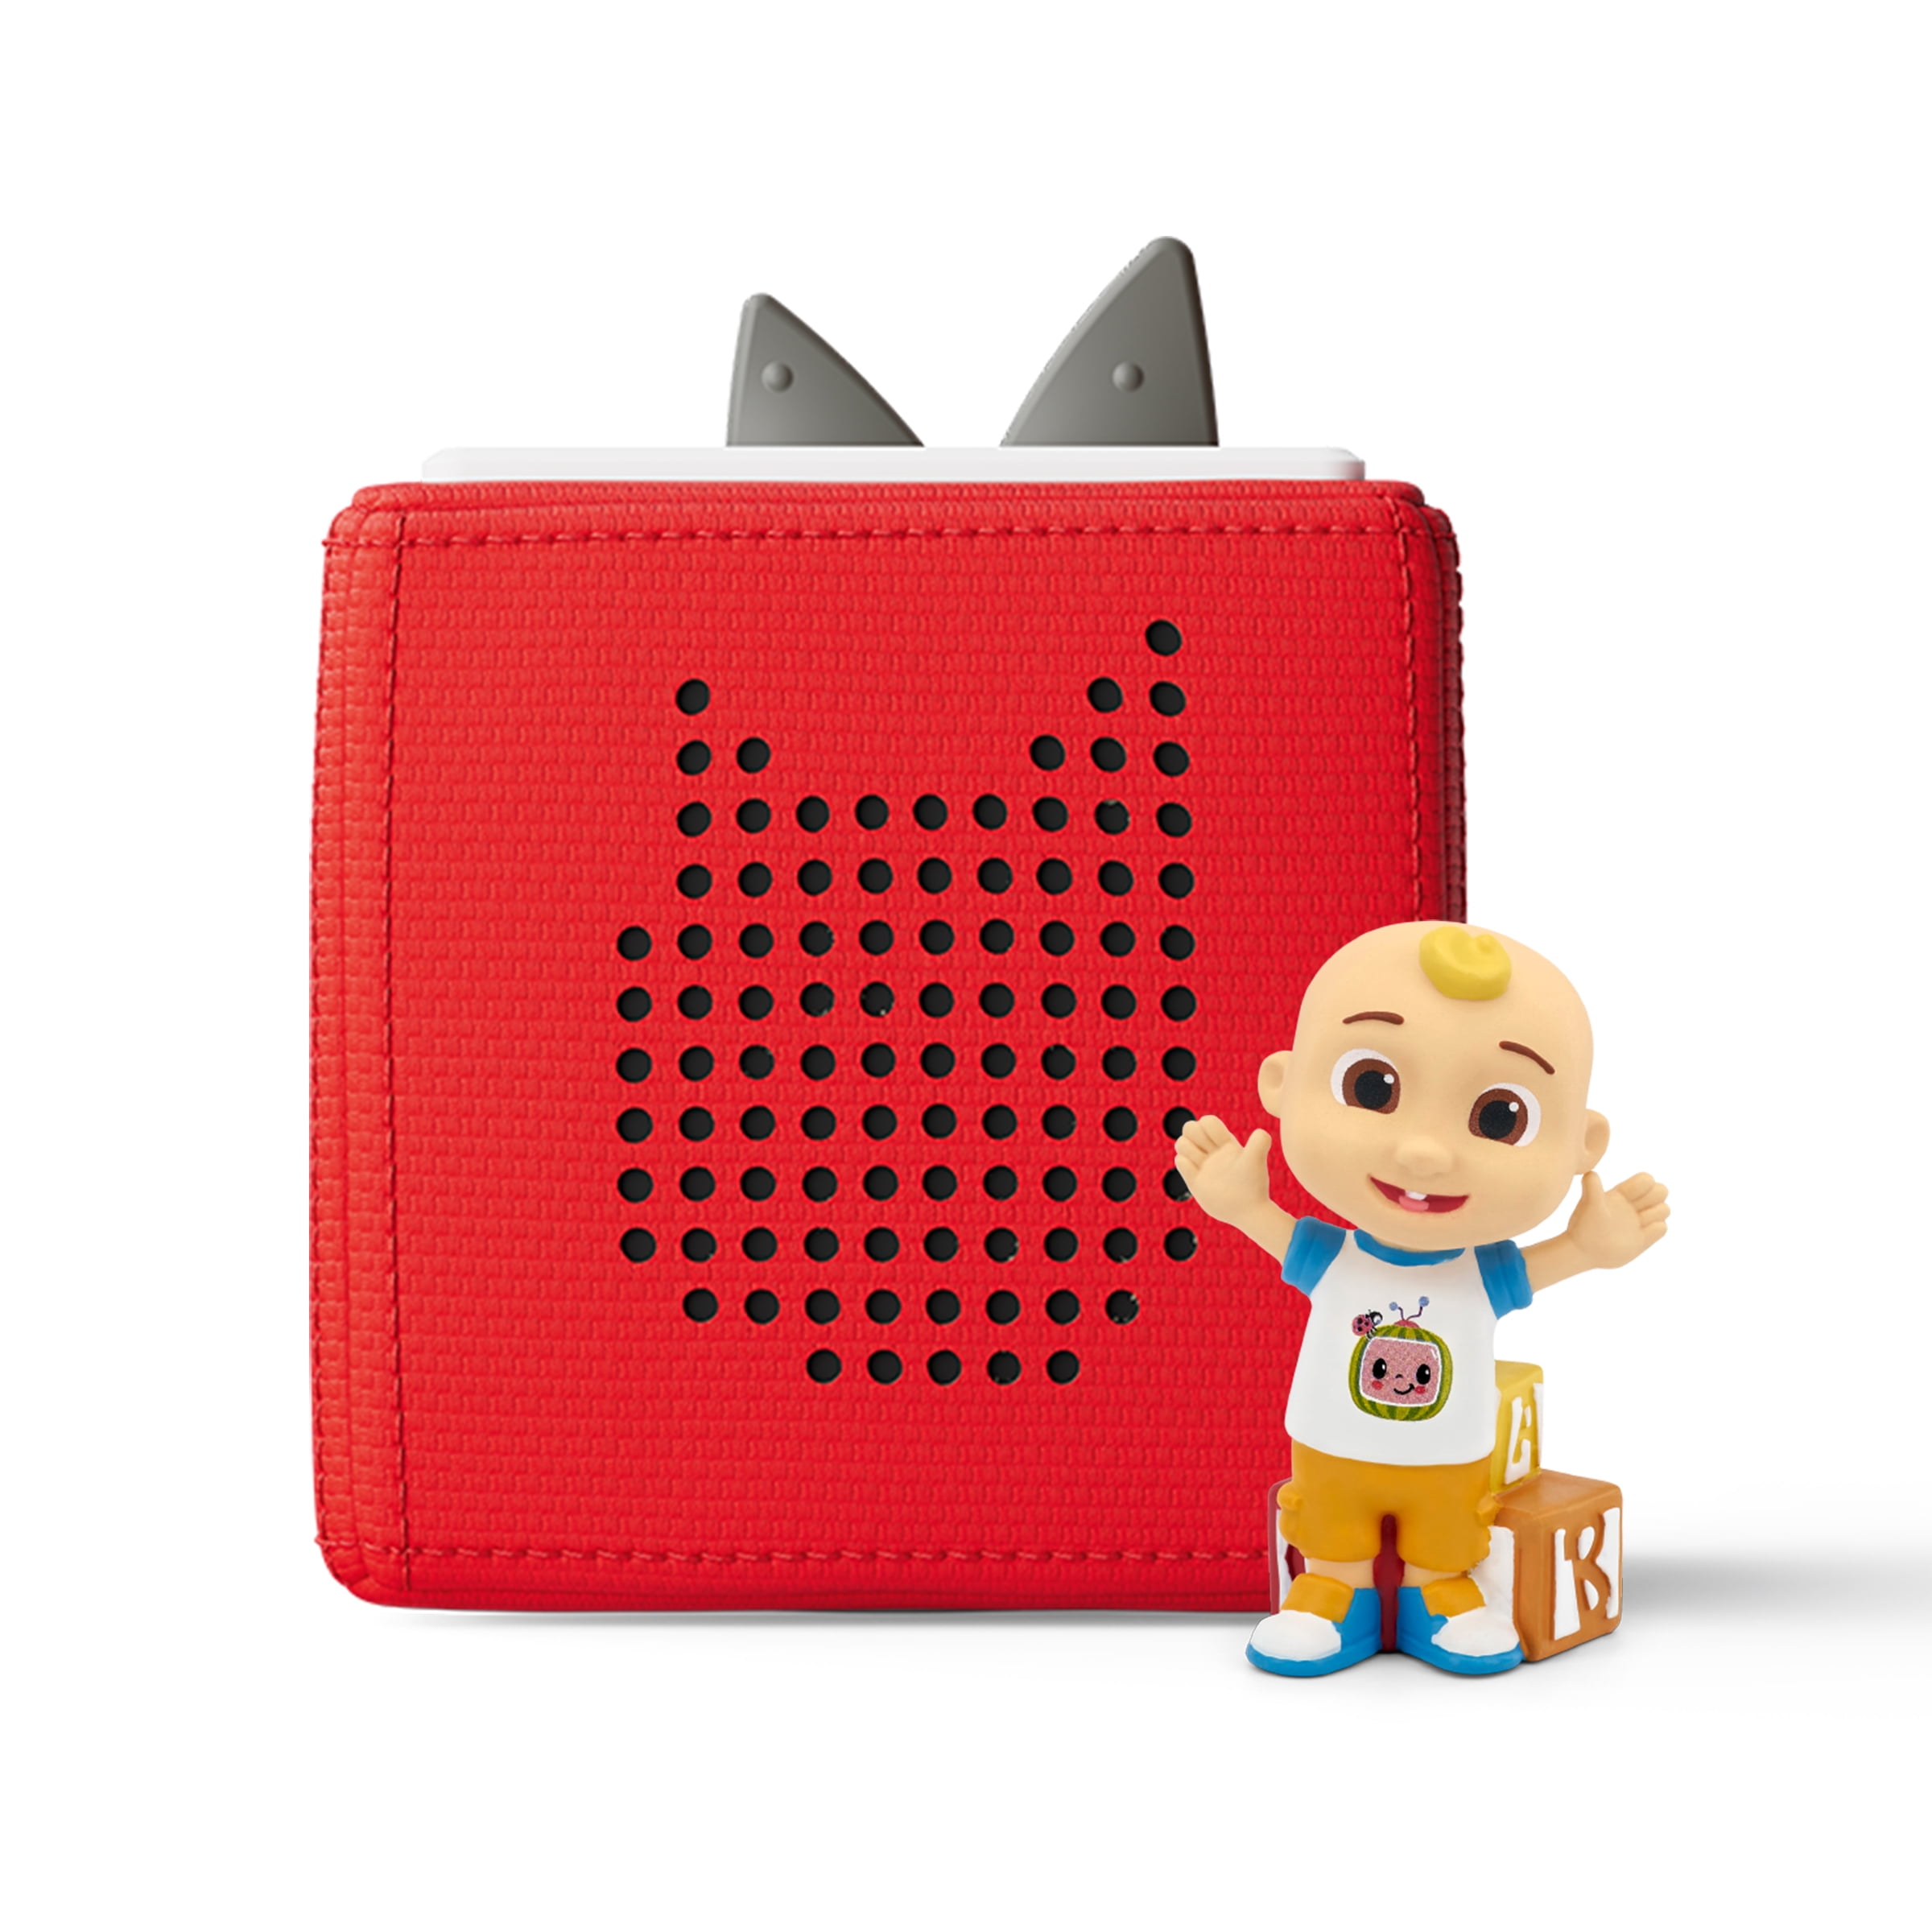 Tonies Cocomelon Toniebox Audio Player Starter Set with JJ, Red